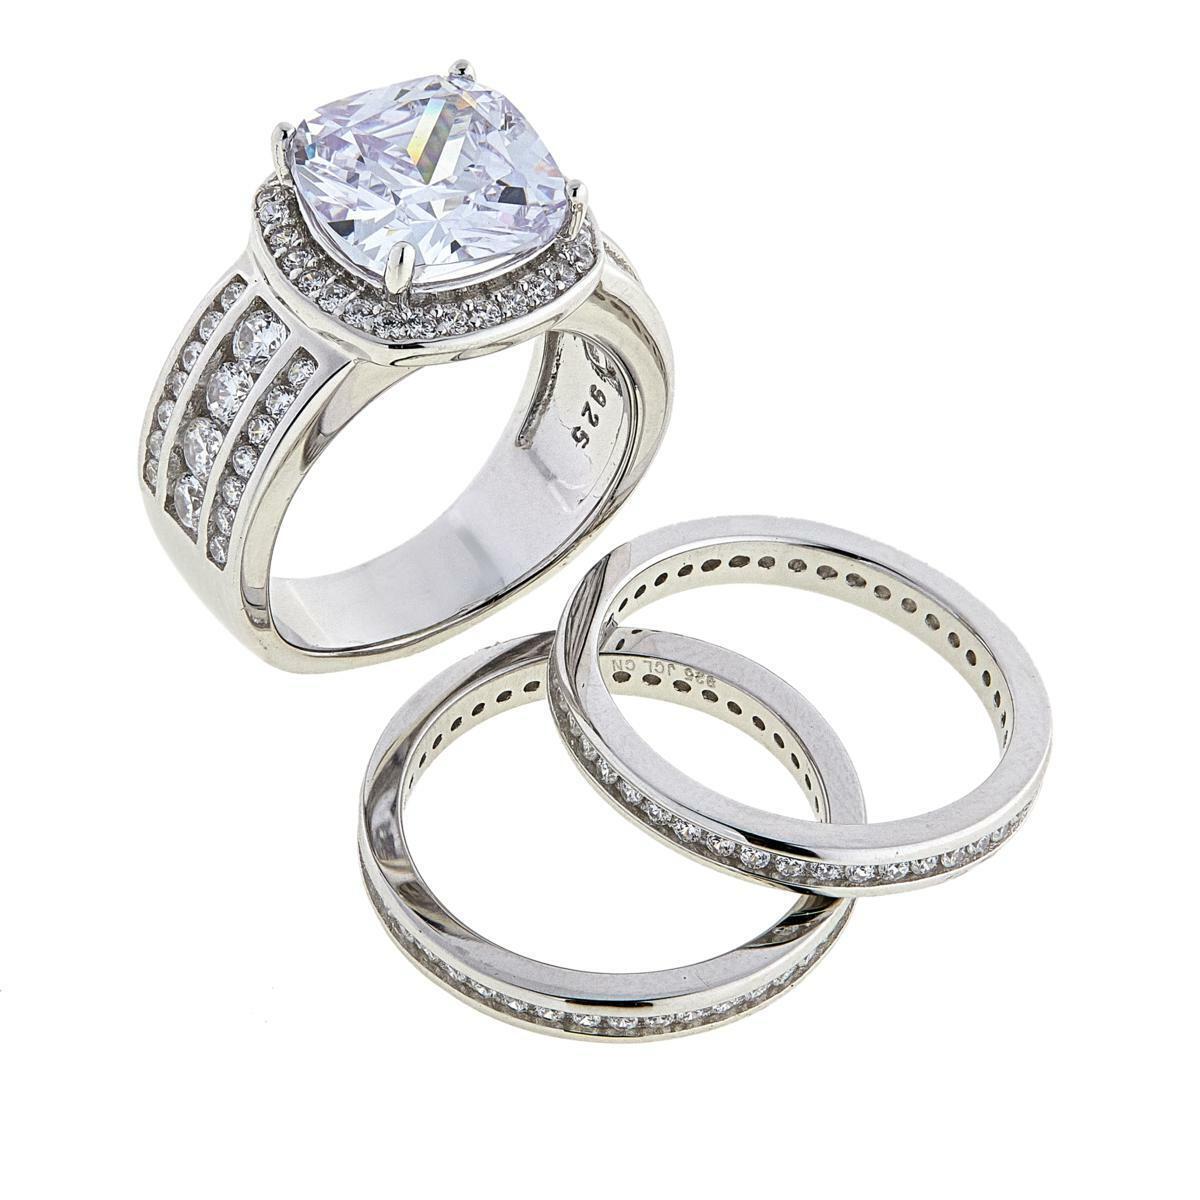 Absolute Sterling Silver 3pc Simulated Diamond Band Ring Set, Size 7